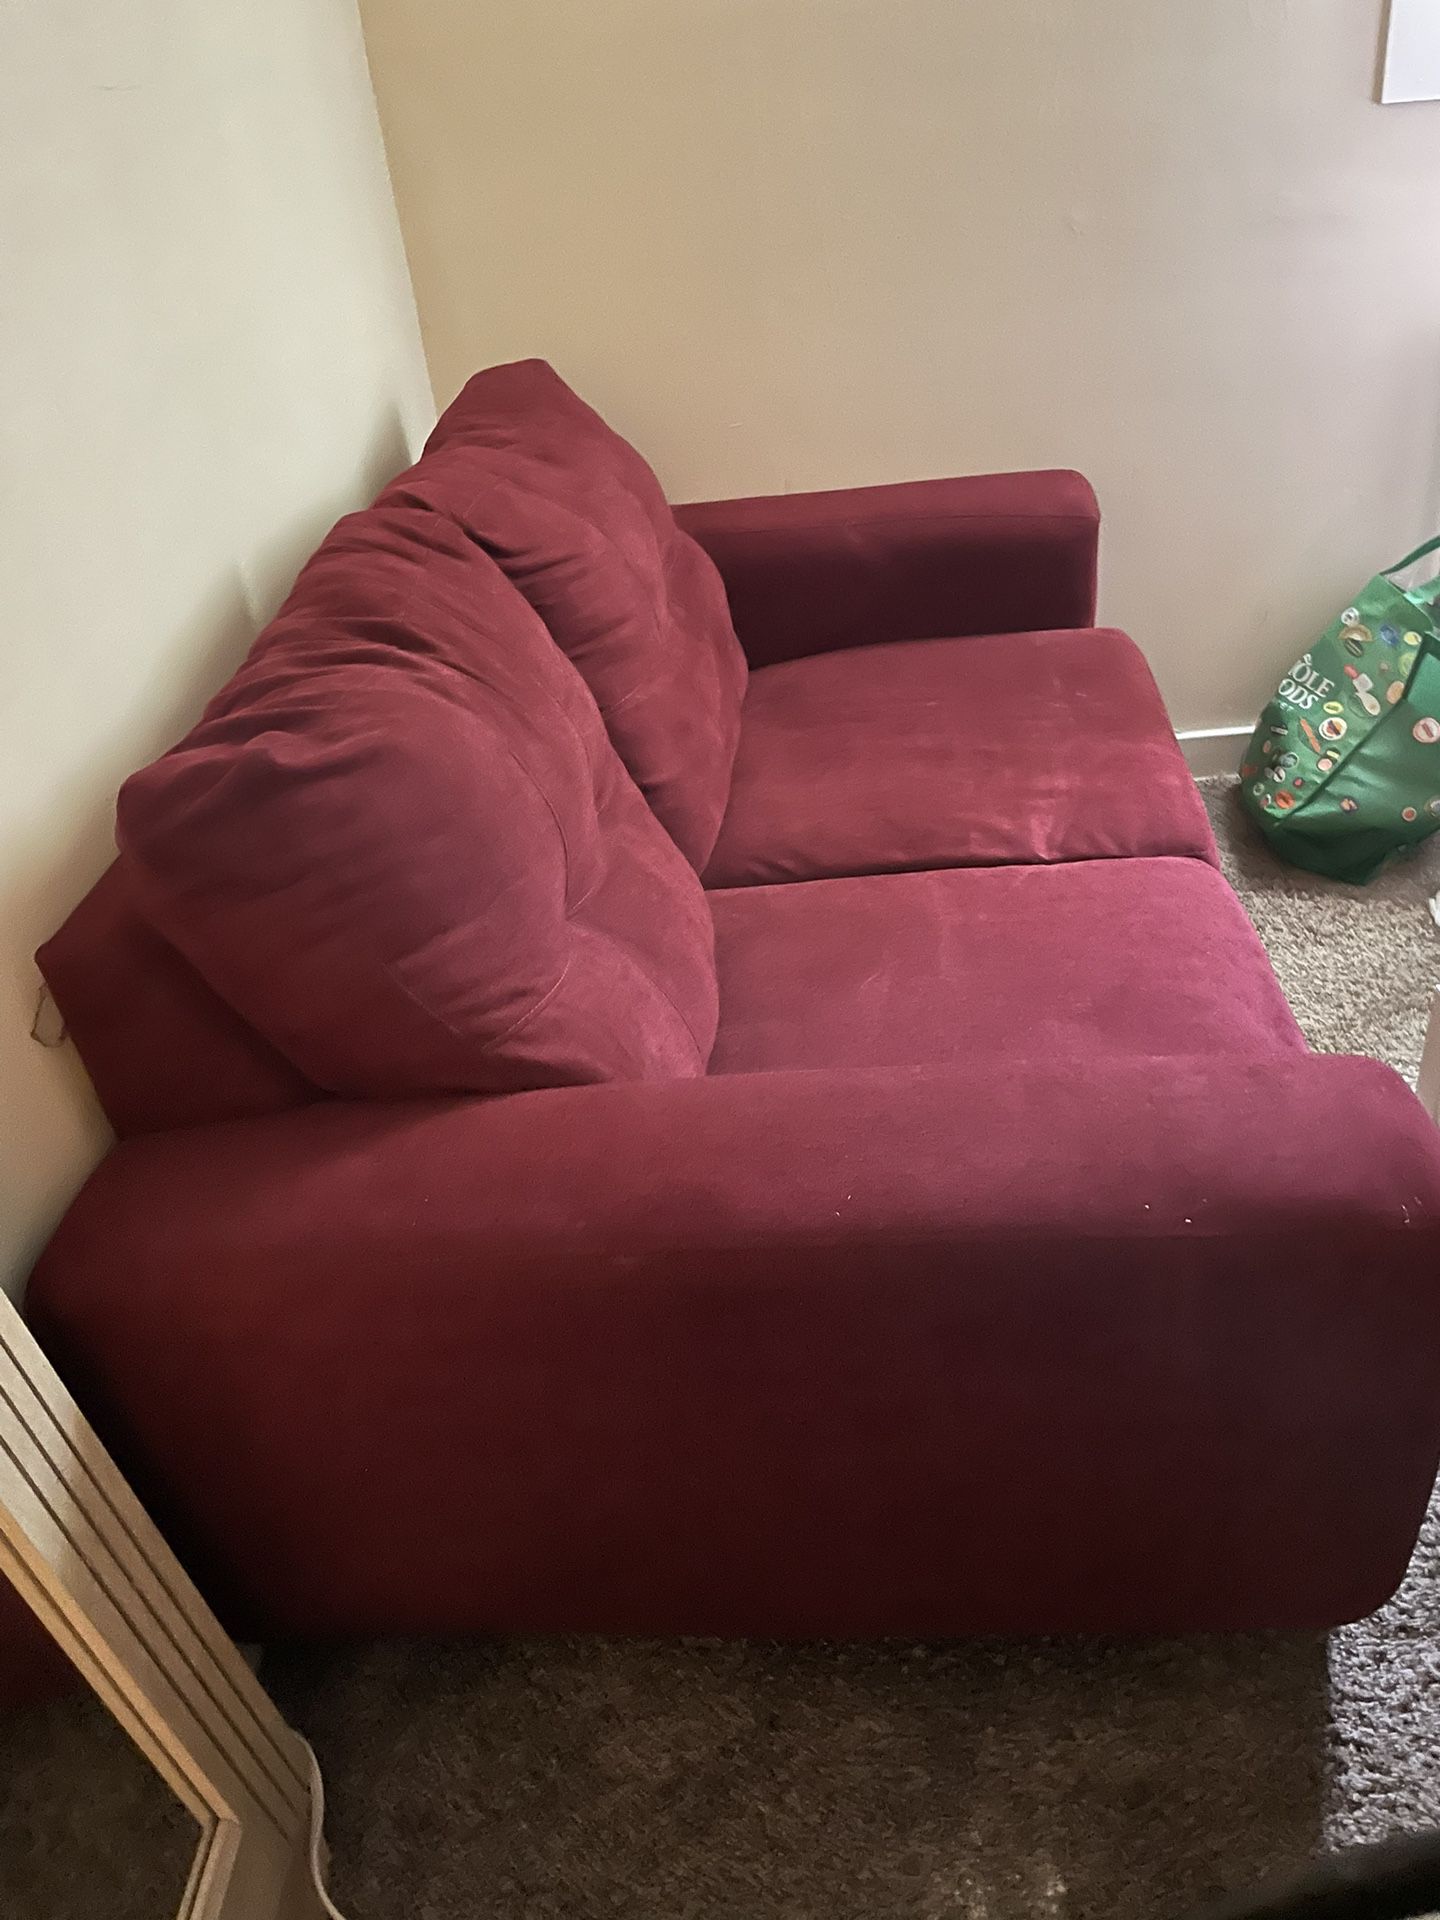 Red Couch Set (Long And Short) for Sale in Atlanta, GA - OfferUp